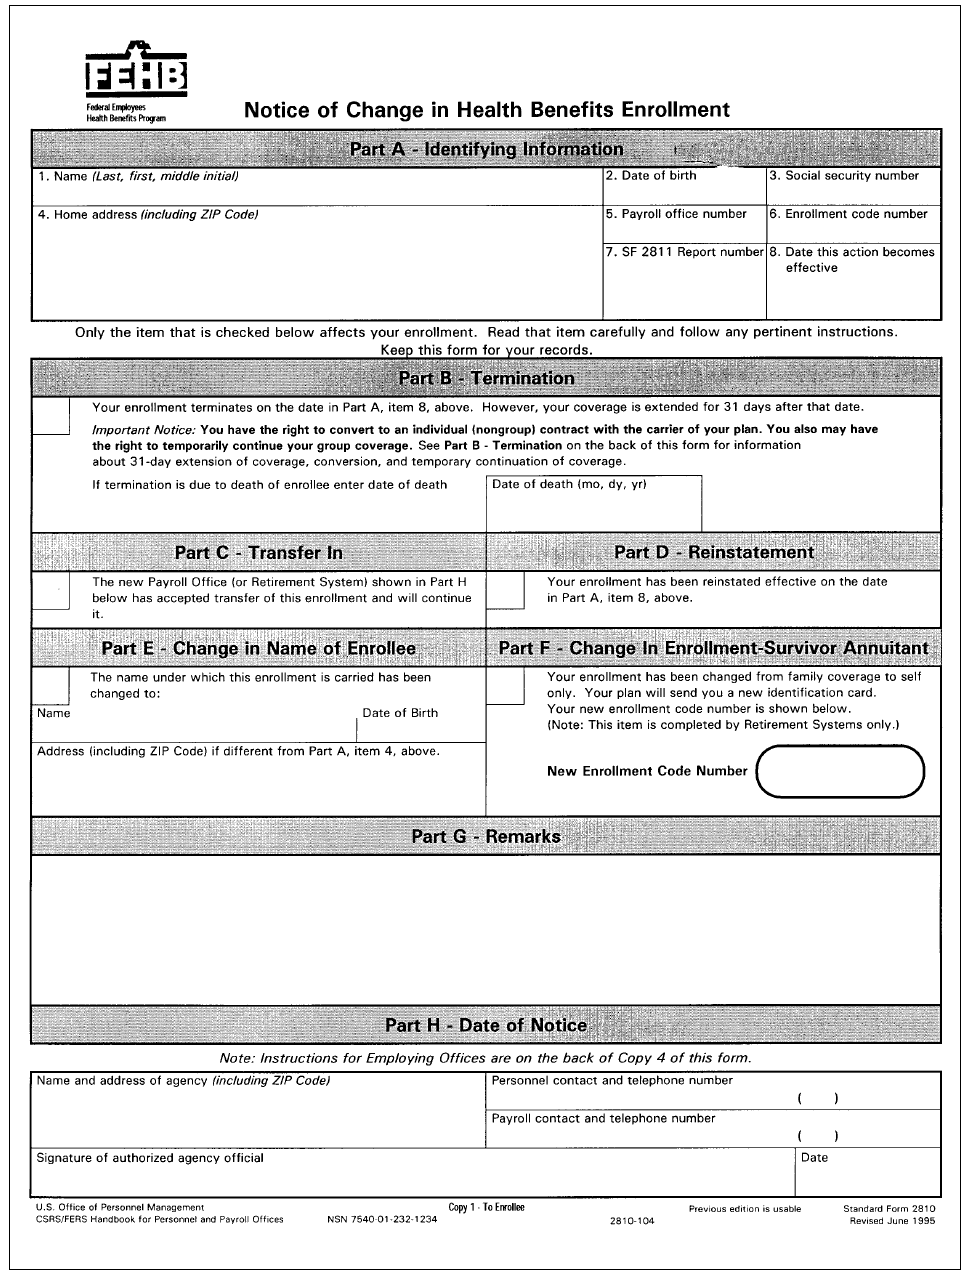 Form SF-2810, Notice of Change in Health Benefits Enrollment